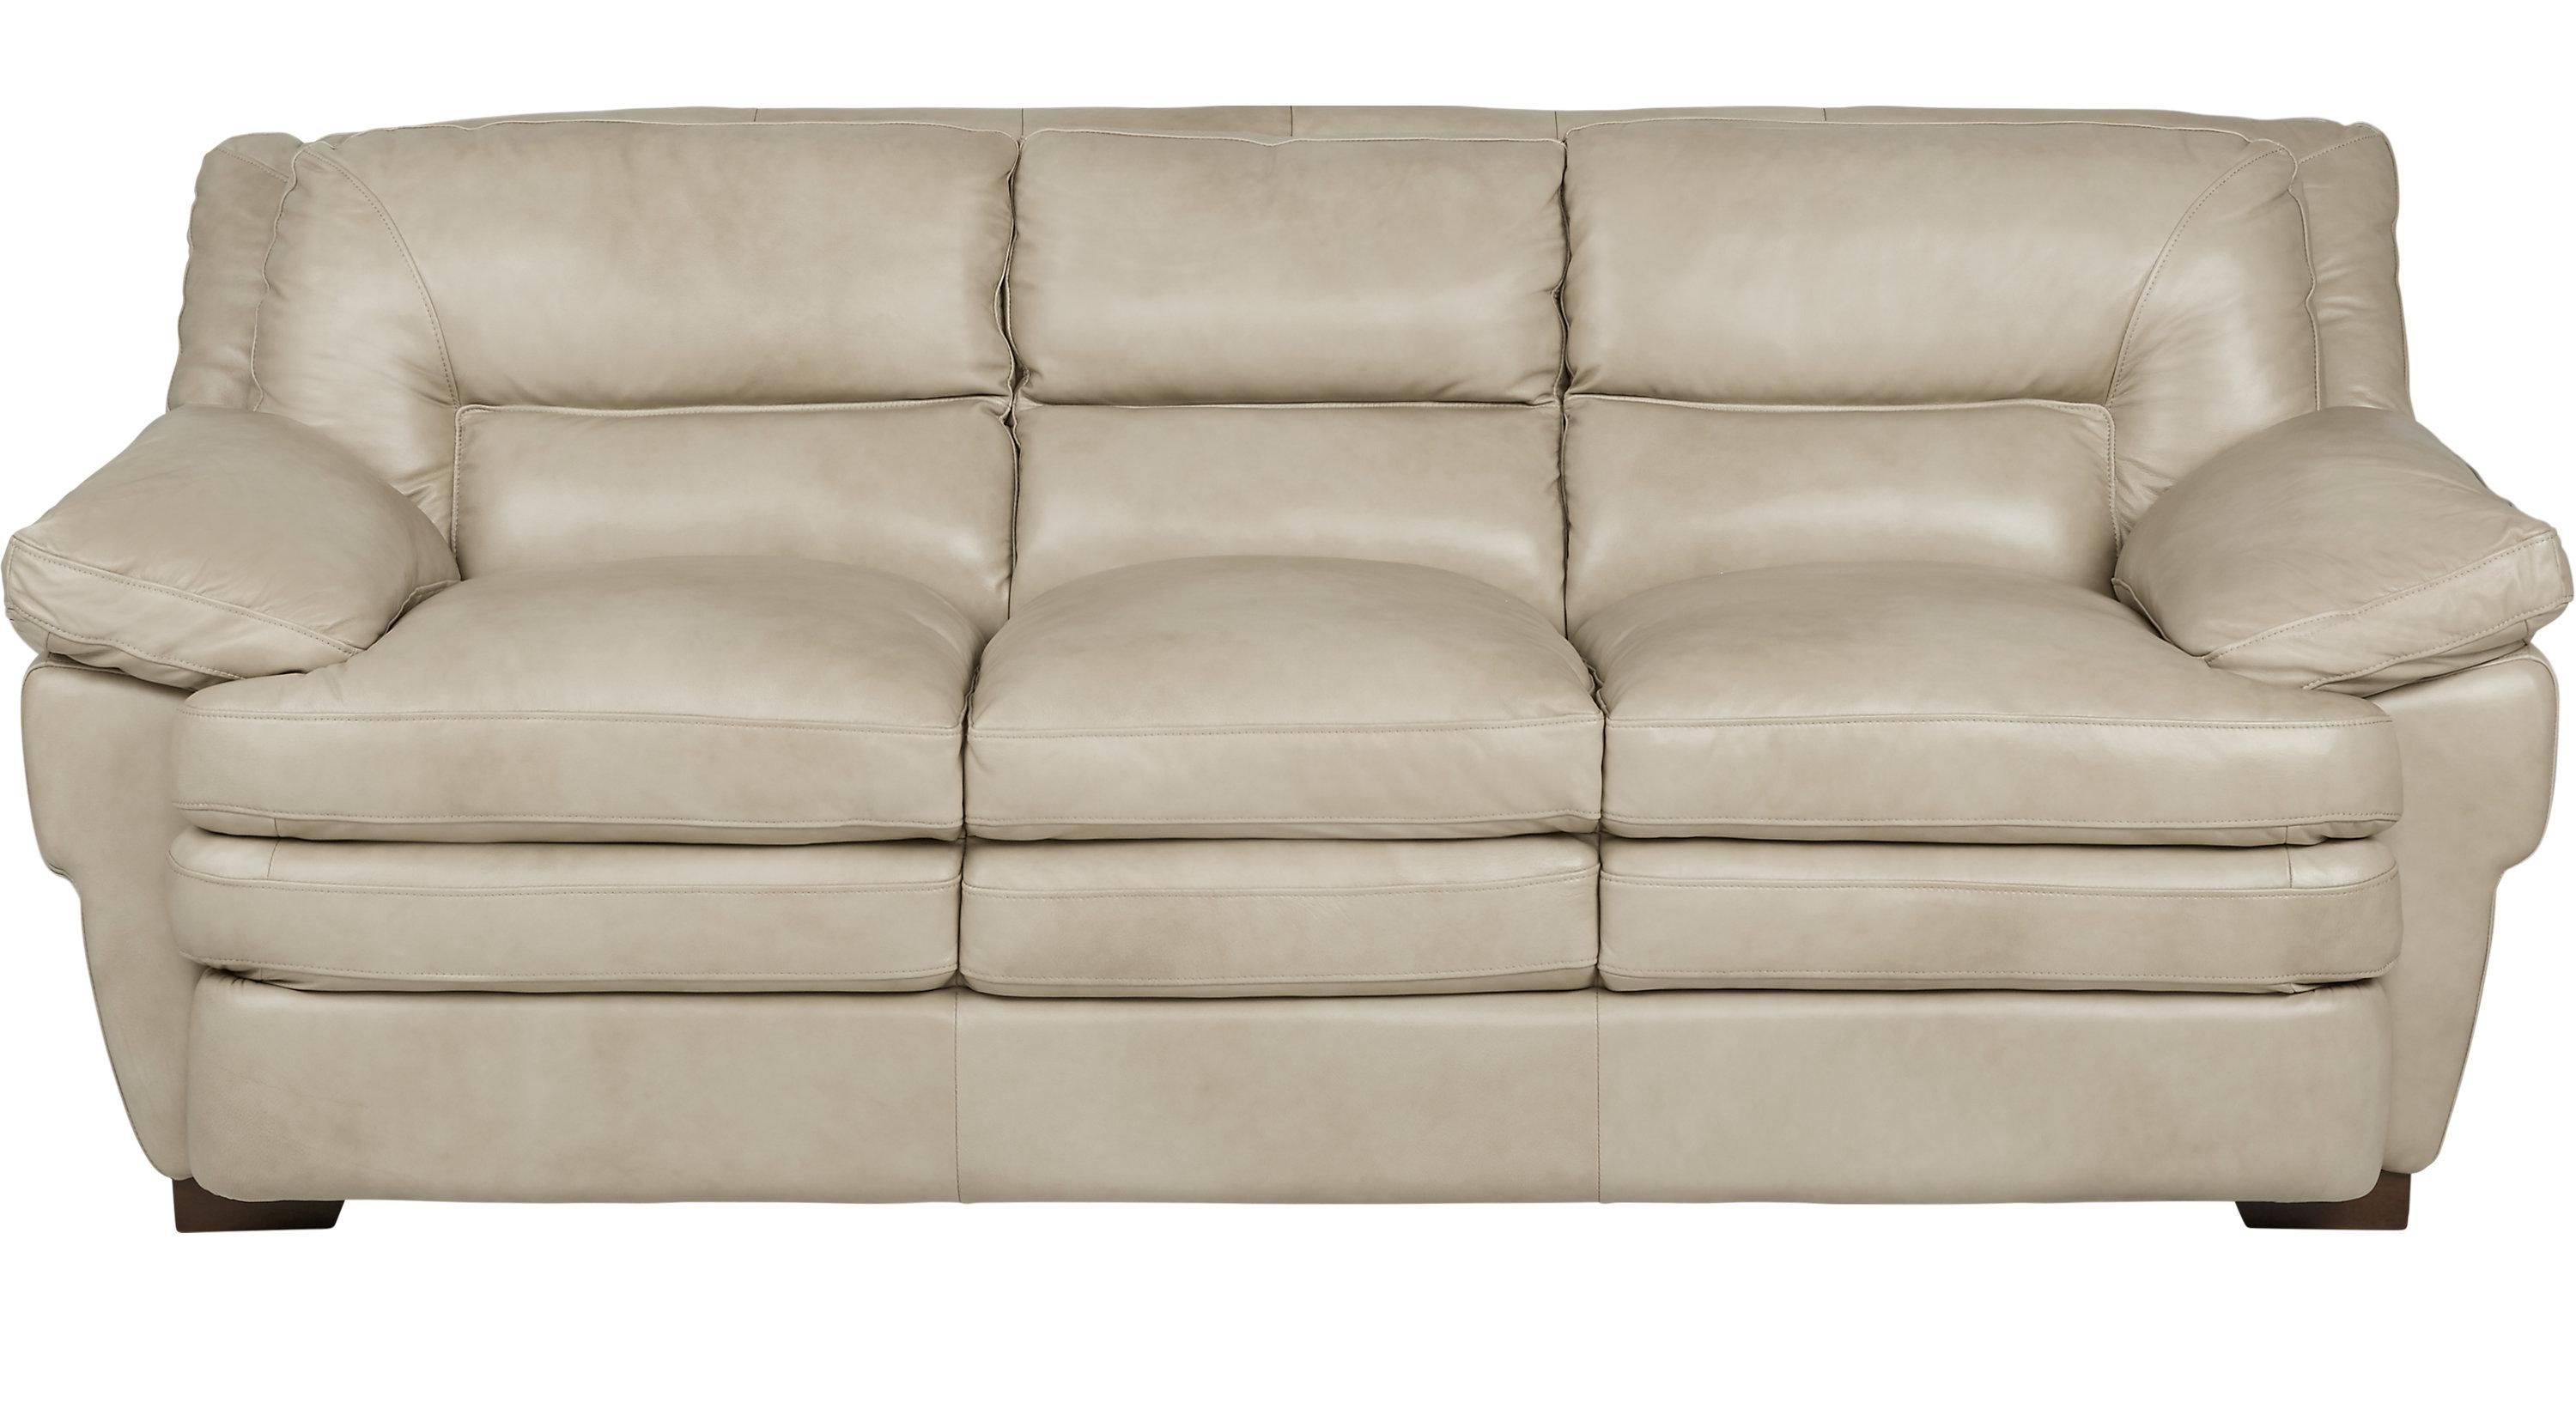 $988.00 – Aventino Tan Leather Sofa – Classic – Transitional, Inside Leather Sofas (Photo 8 of 21)